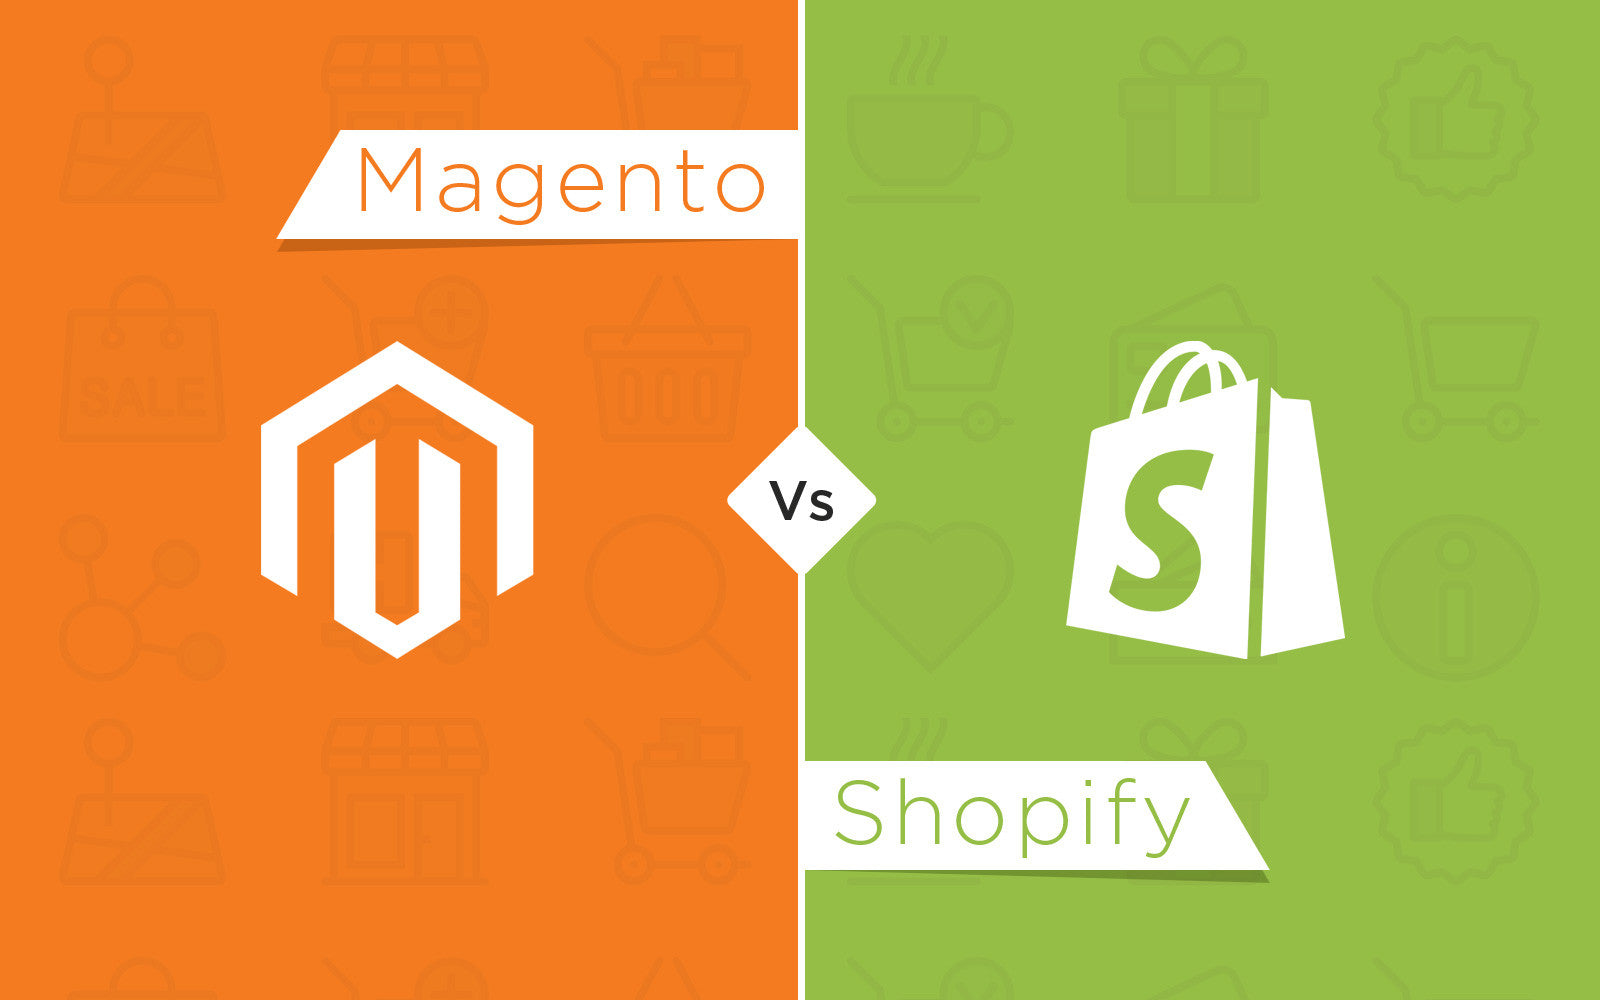 Magento Vs Shopify – Which One Should You Use?